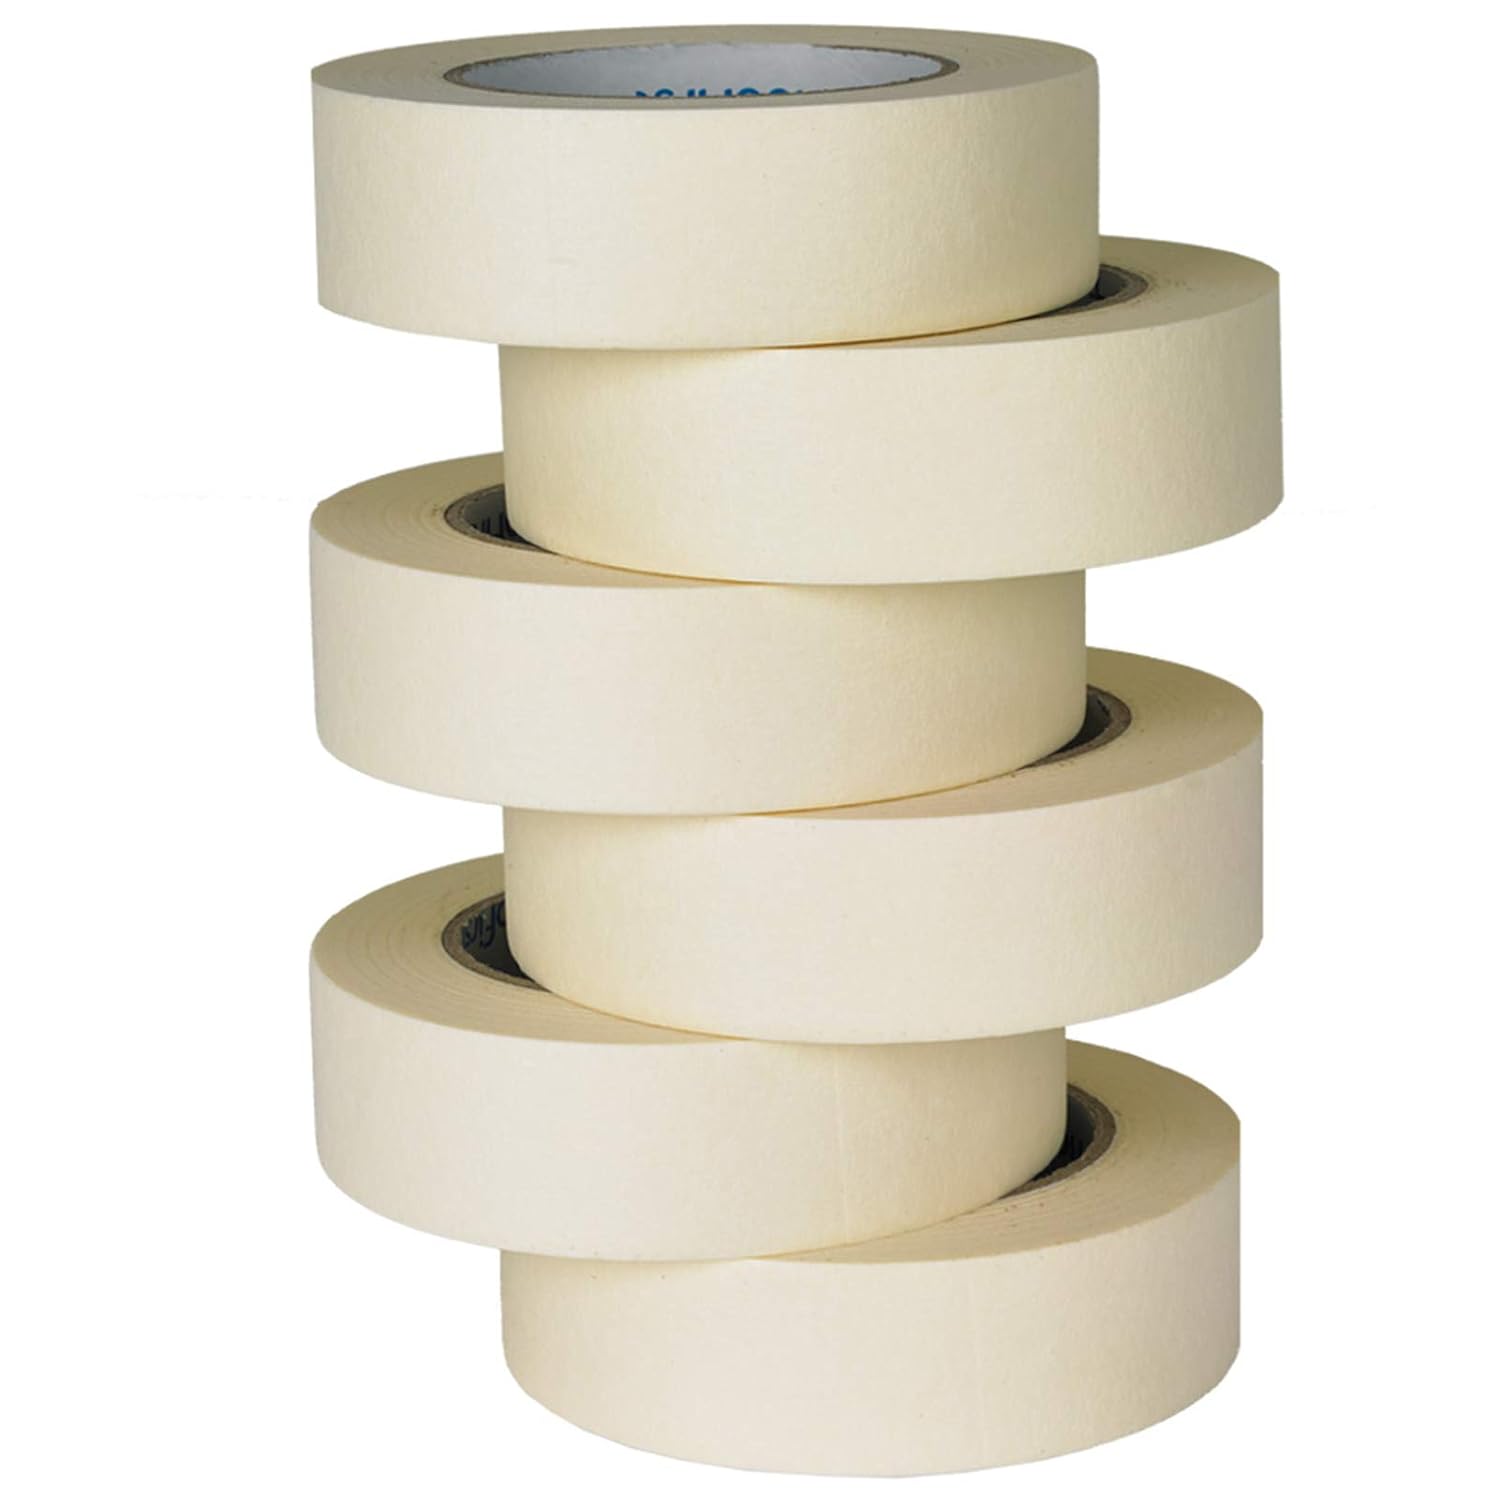 Generic TIANBO FIRST Masking Tape 6 Rolls, General Purpose Wide Masking Tape  for Home and Office, 1.41 Inches x 60 Yards, Beige